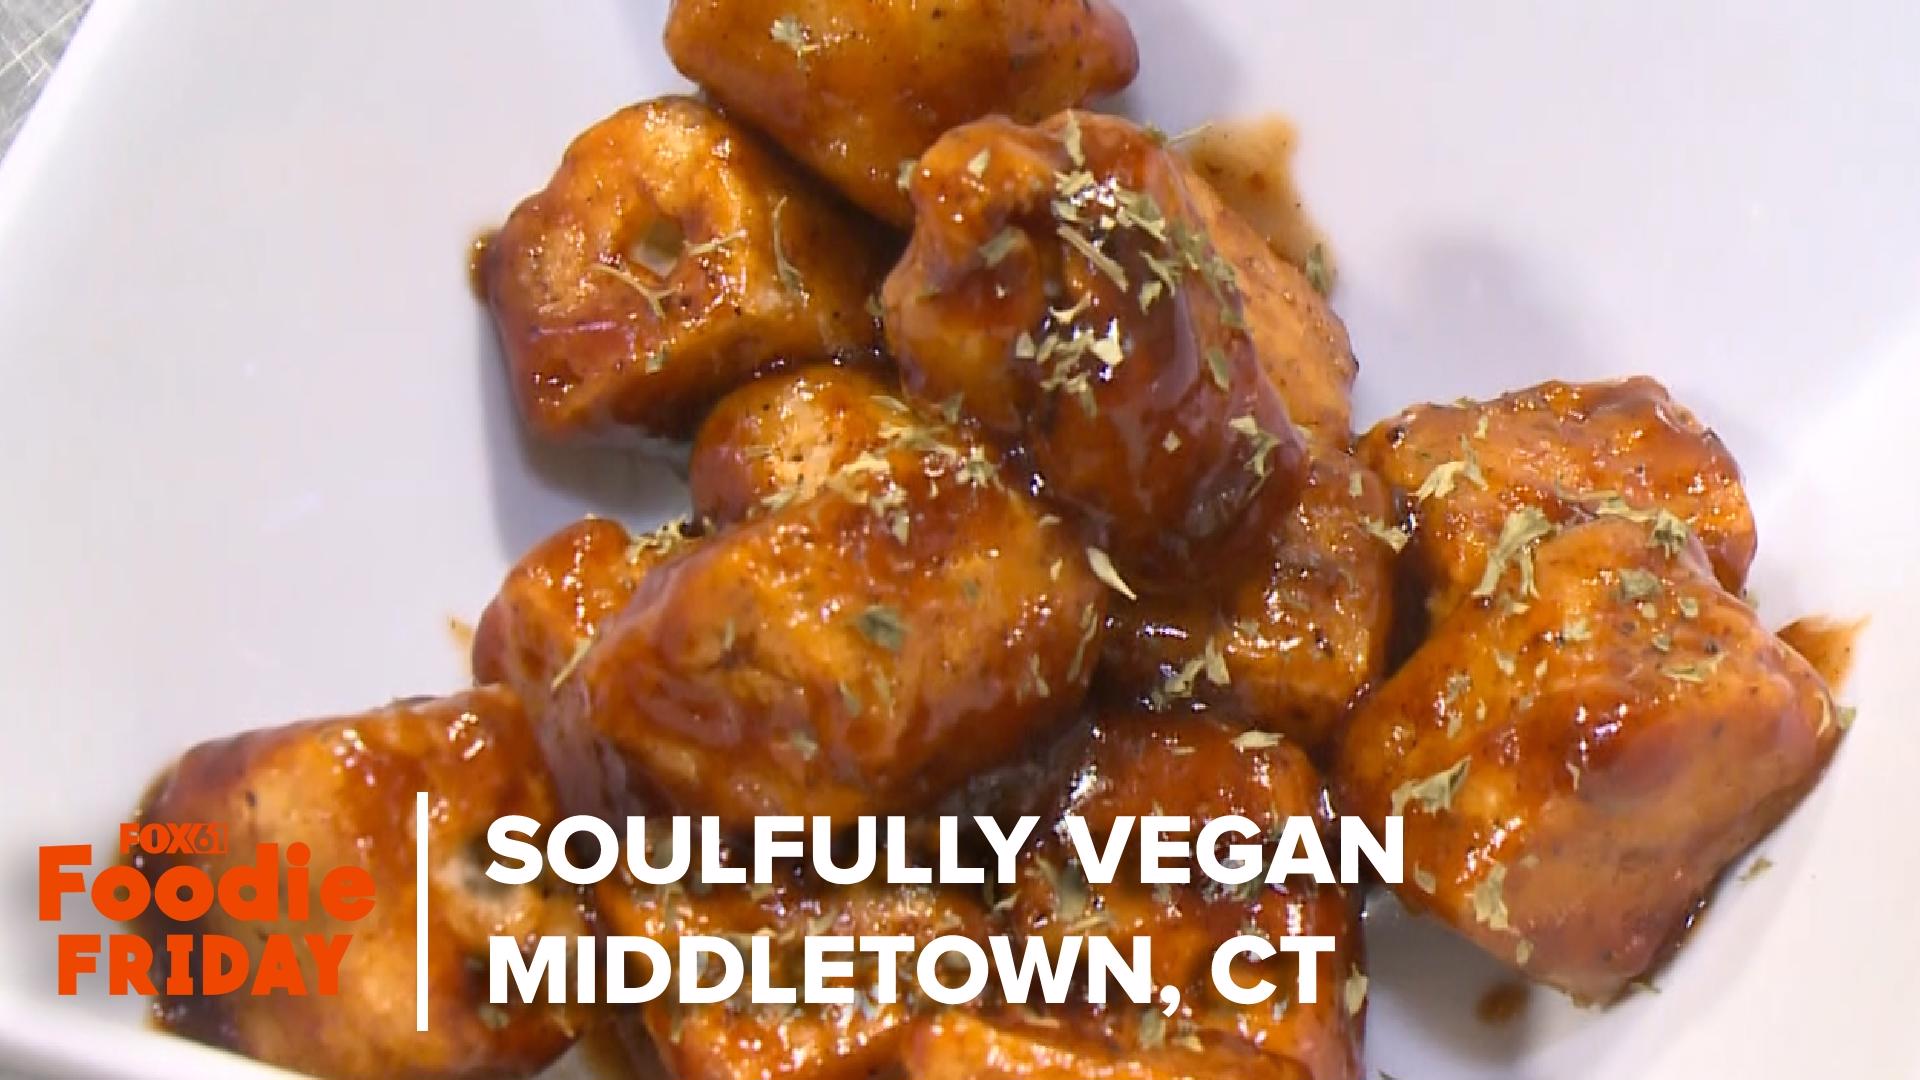 FOX61's Symphonie Privett visit SoulFully Vegan in Middletown. We visited their kitchen, but they can typically be found in their food truck at local events.